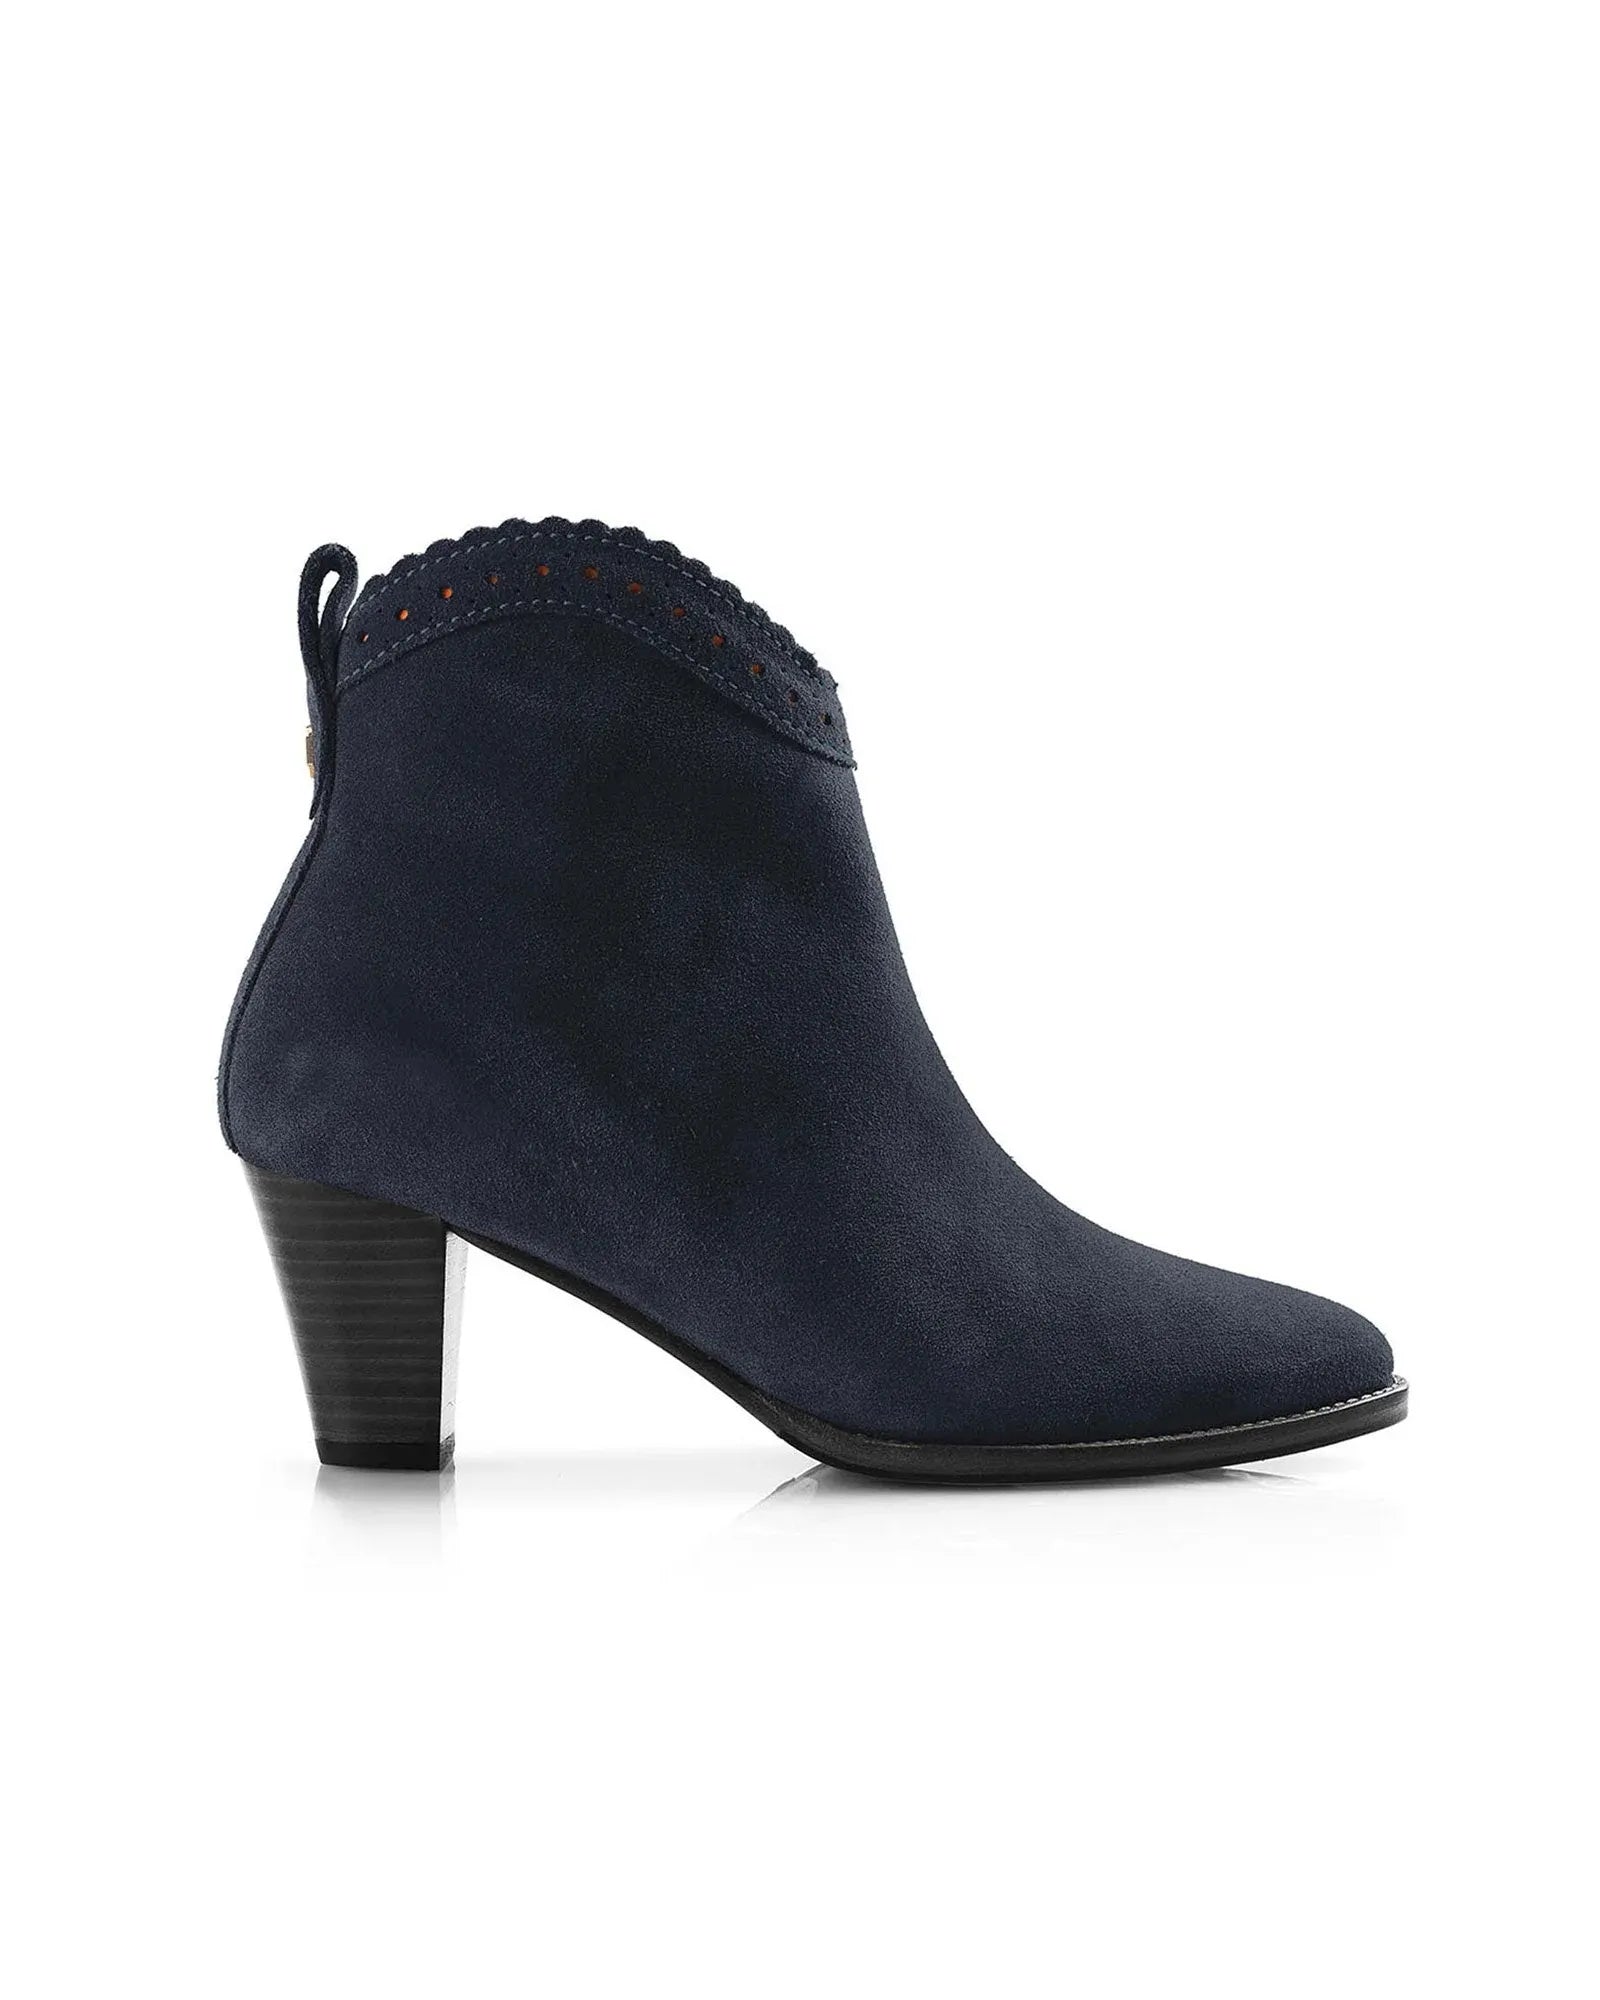 The Regina Ankle Boot in Navy Suede